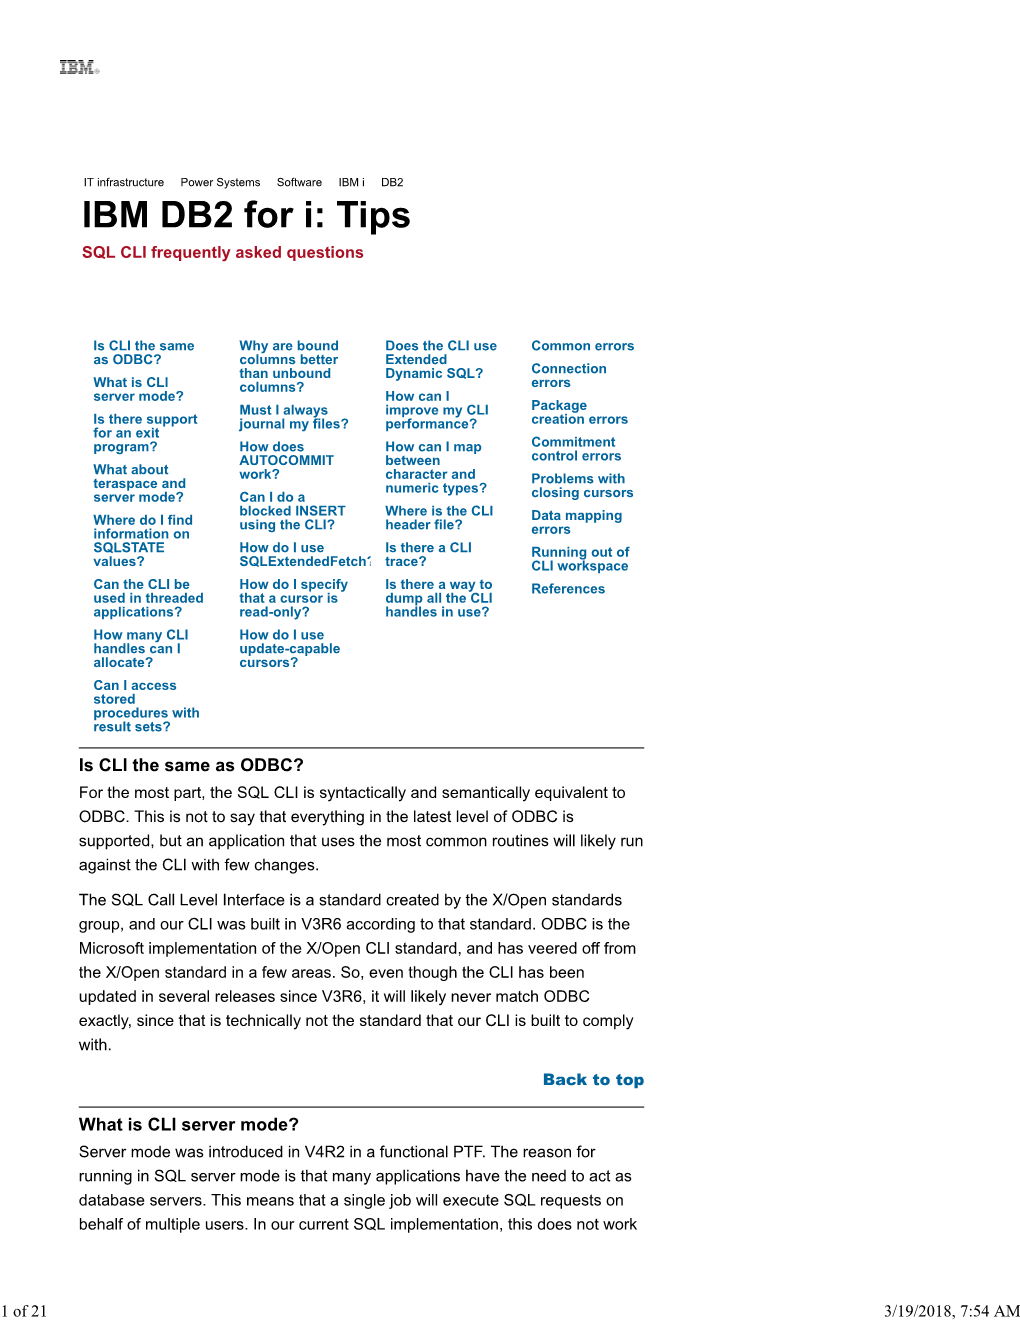 IBM DB2 for I Tips: SQL CLI Frequently Asked Questions